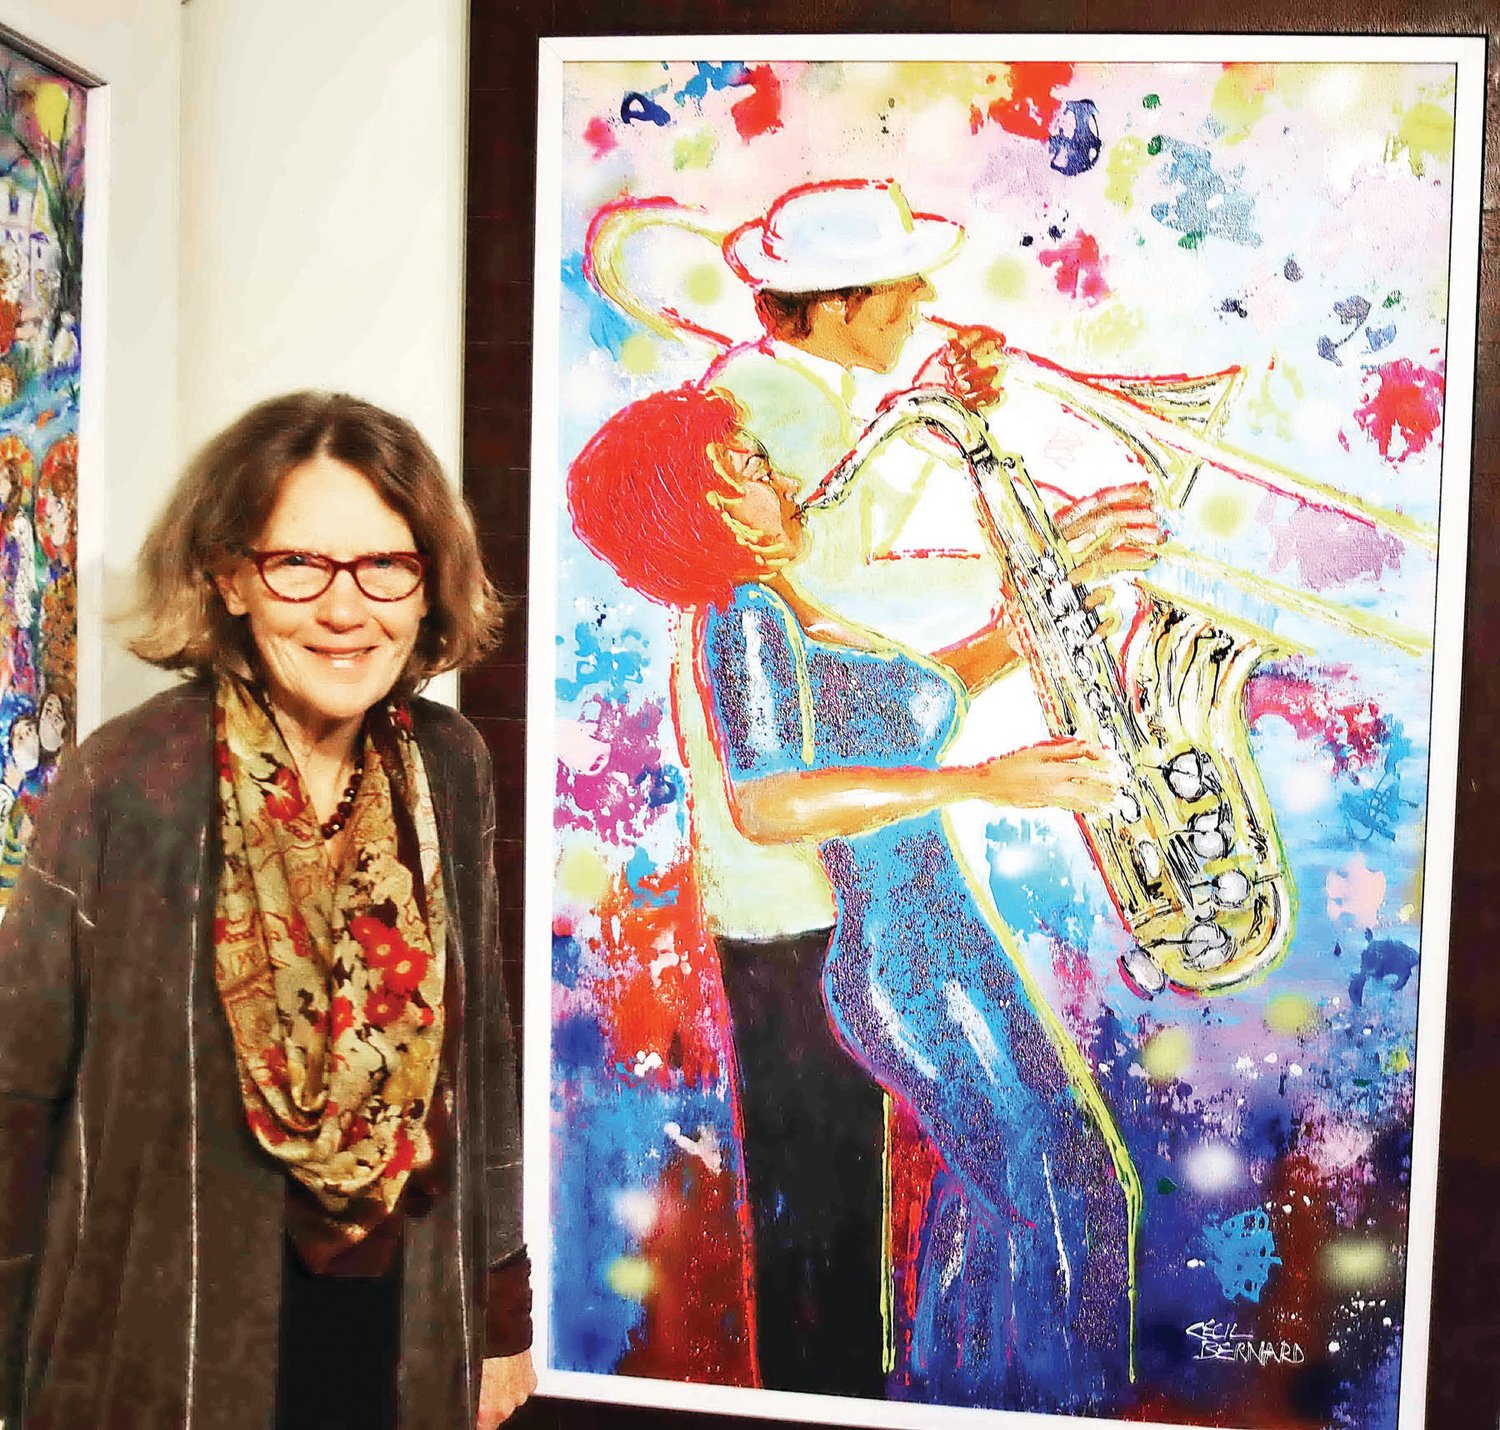 New Hope Arts Center Executive Director Carol Cruickshanks with a painting by Cecil Bernard titled “Bourbon St Duet,” in acrylic on paper.